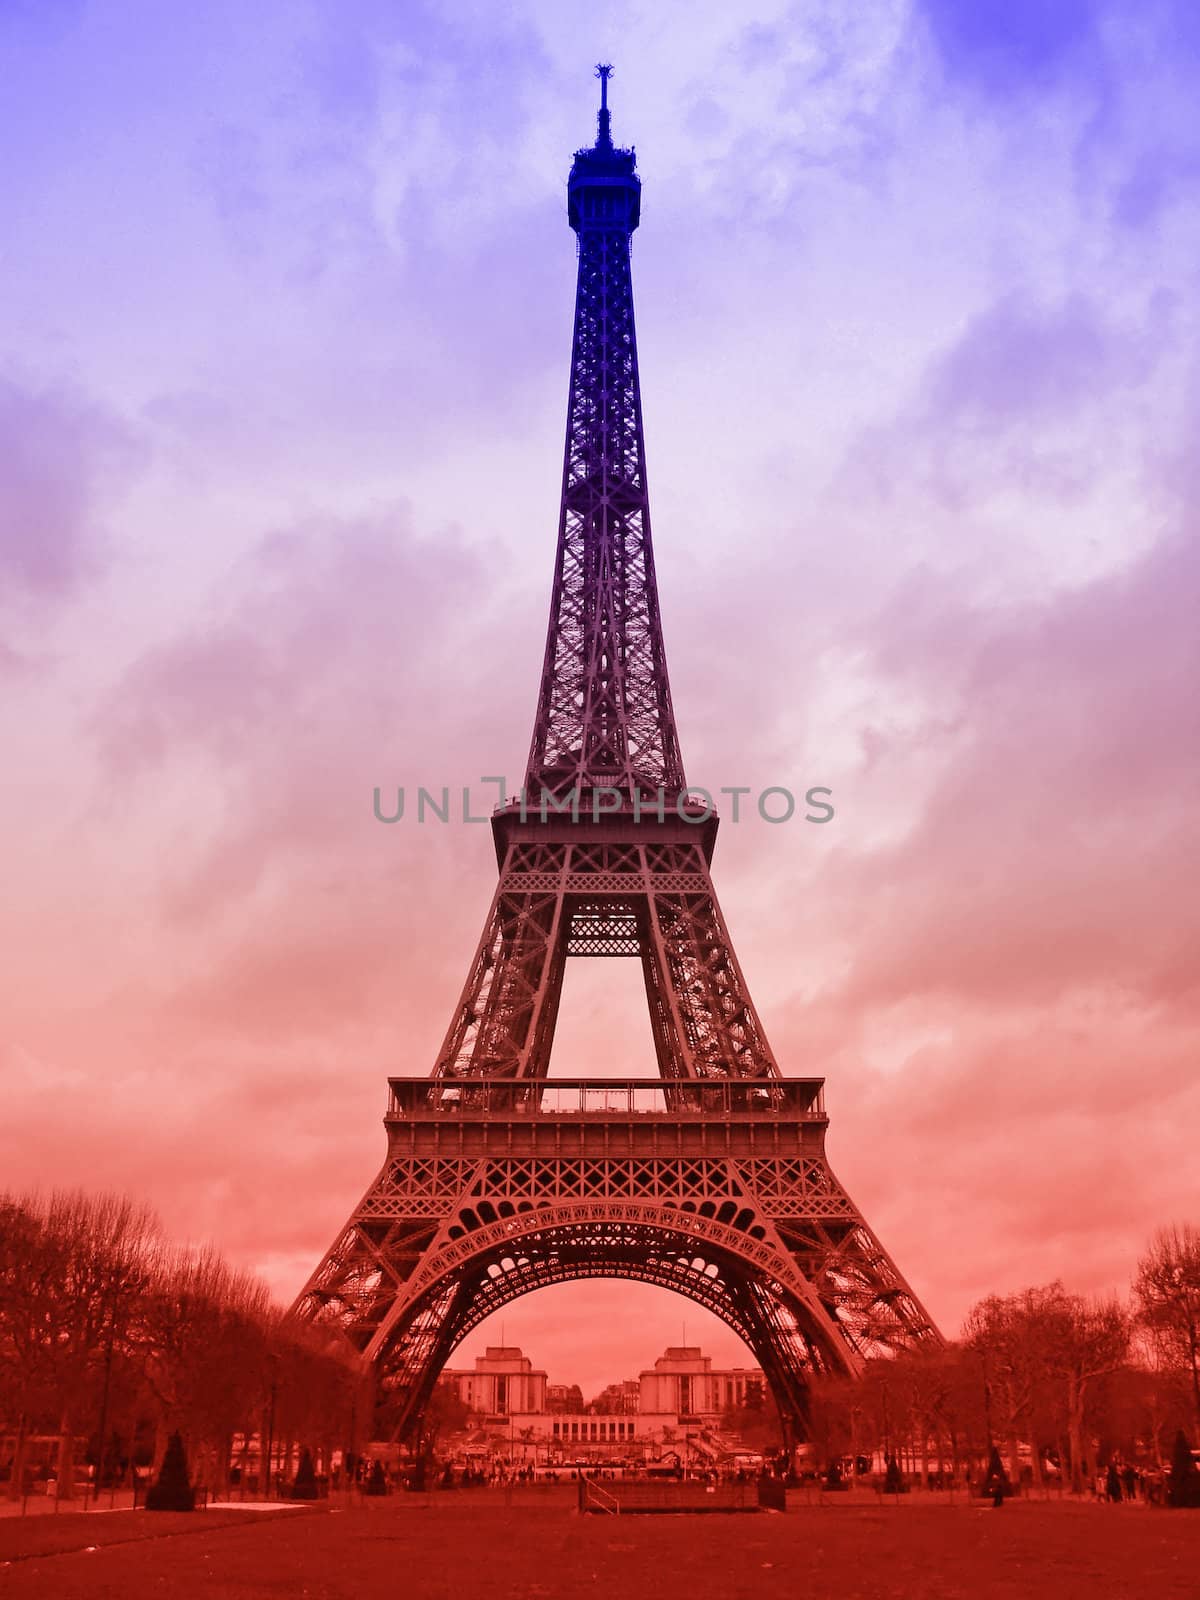 red, white and blue version of the Eiffel Tower